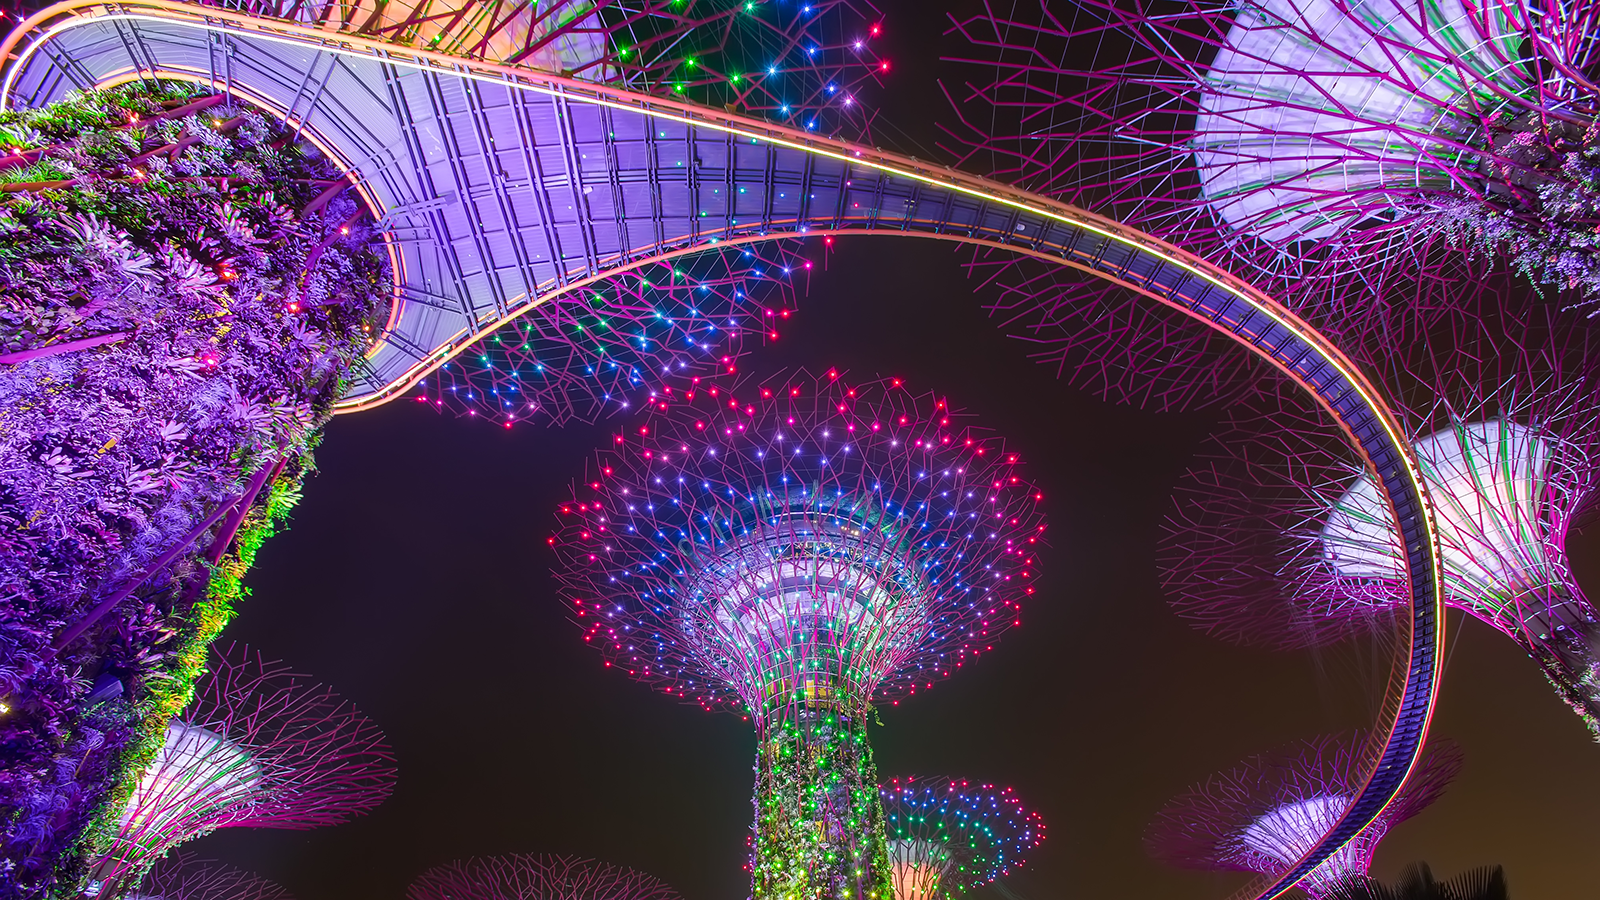 Supertree Garden At Night, Garden By The Bay, Singapore - Garden By The Bay Singapore Night , HD Wallpaper & Backgrounds